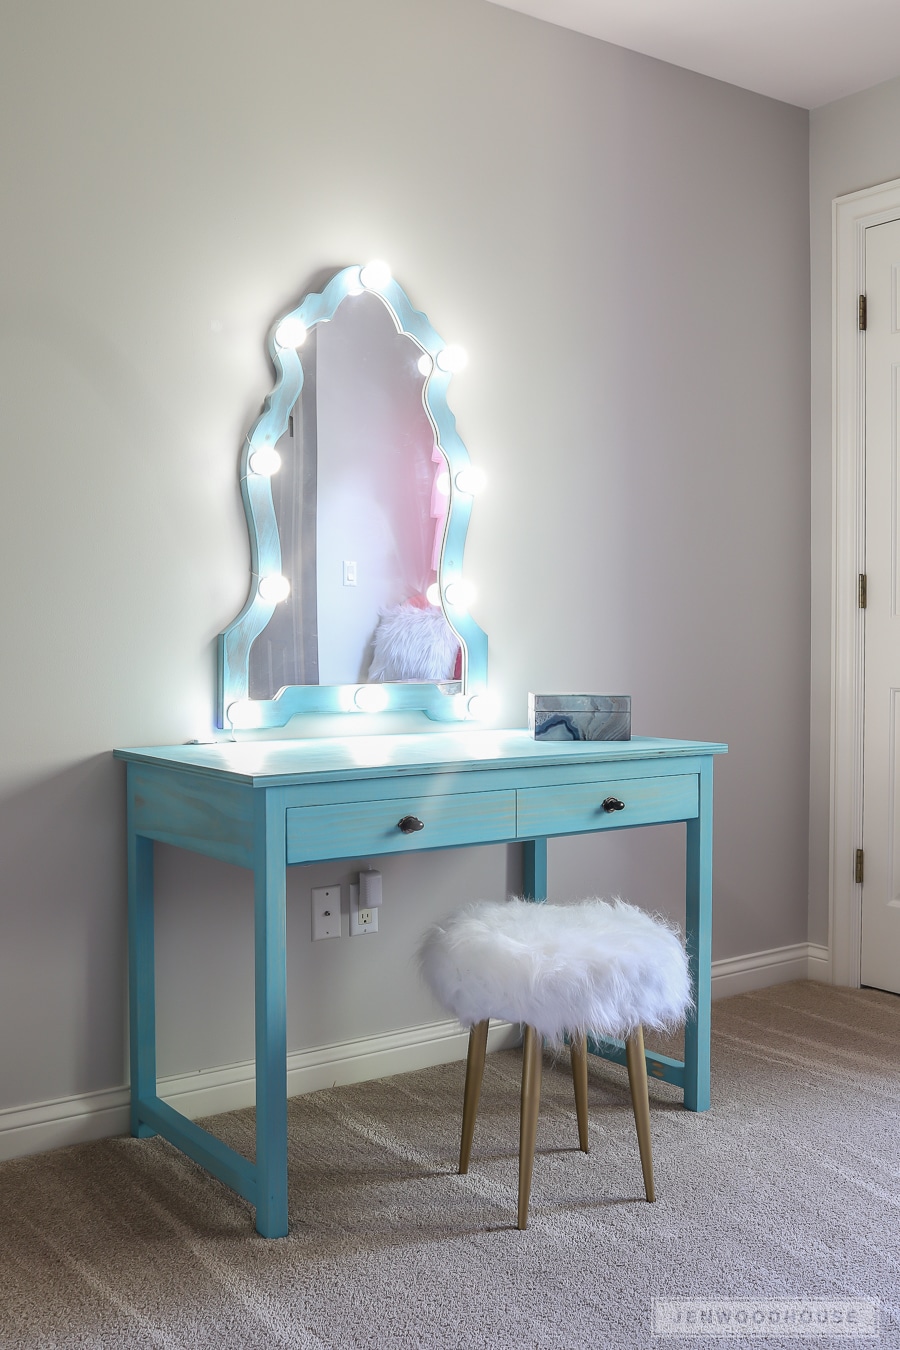 How to build a DIY Makeup Vanity with Lighted Mirror